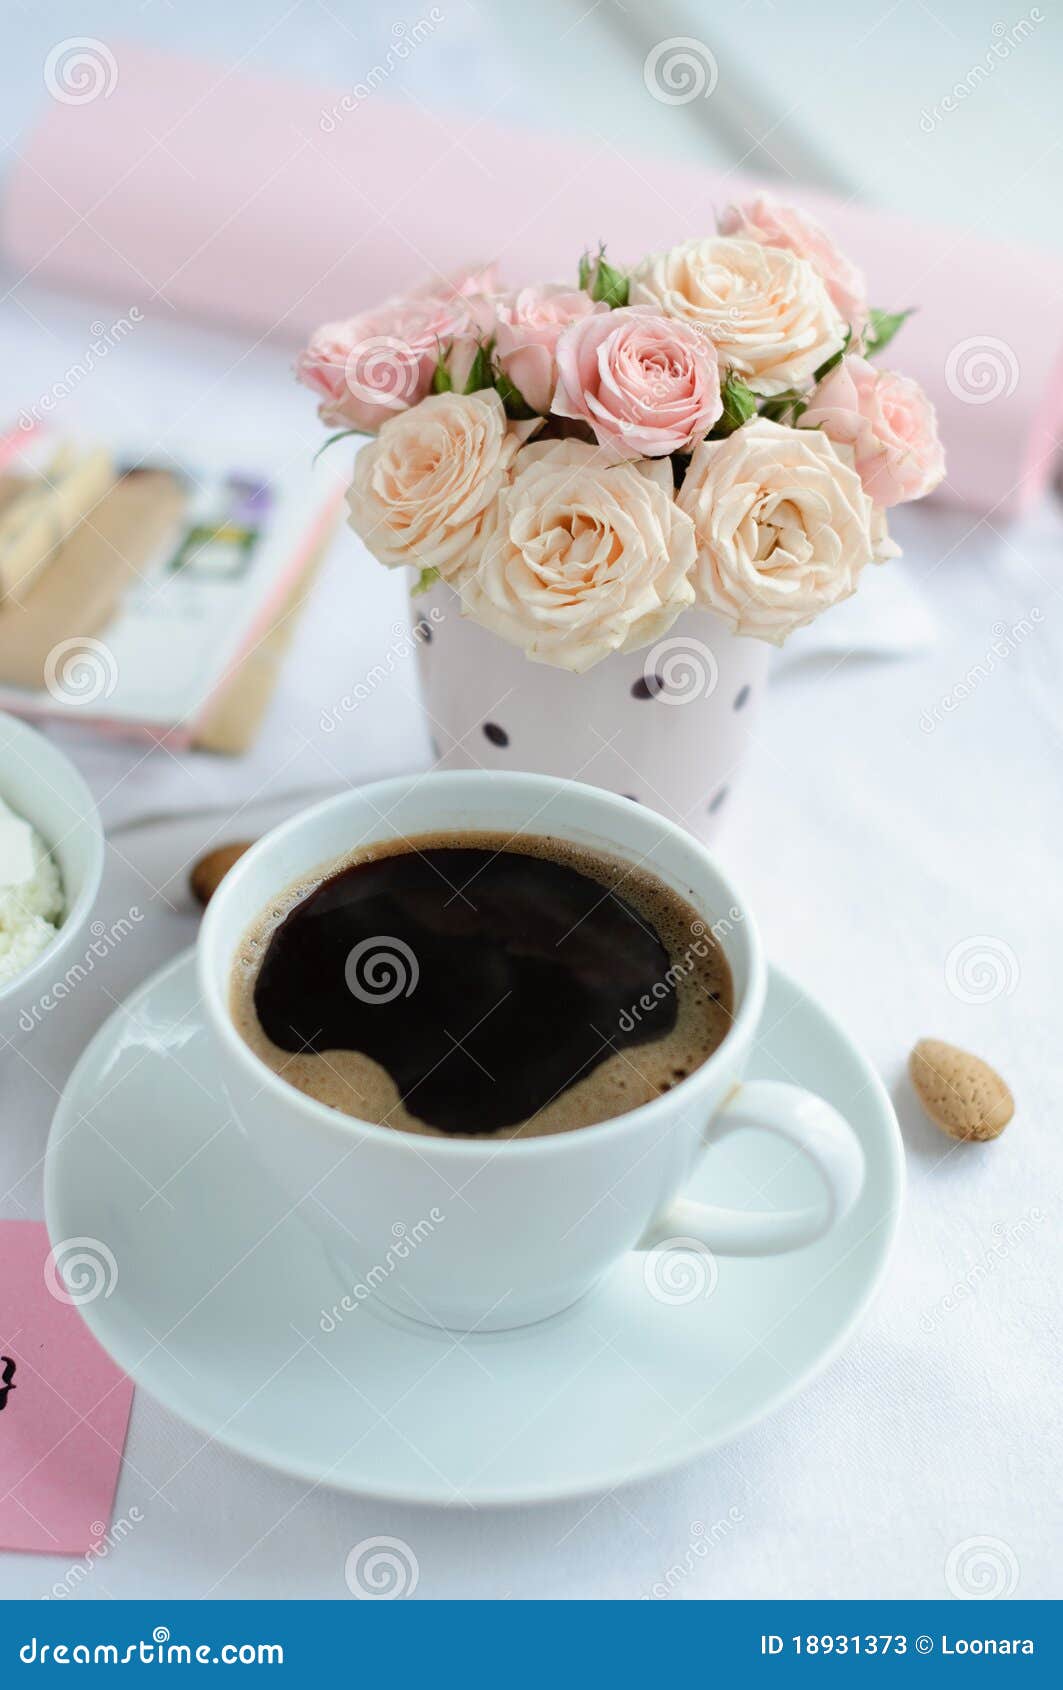 Cup Of Coffee And A Bouquet Of Roses Stock Image - Image Of Floral, Bouquet:  18931373